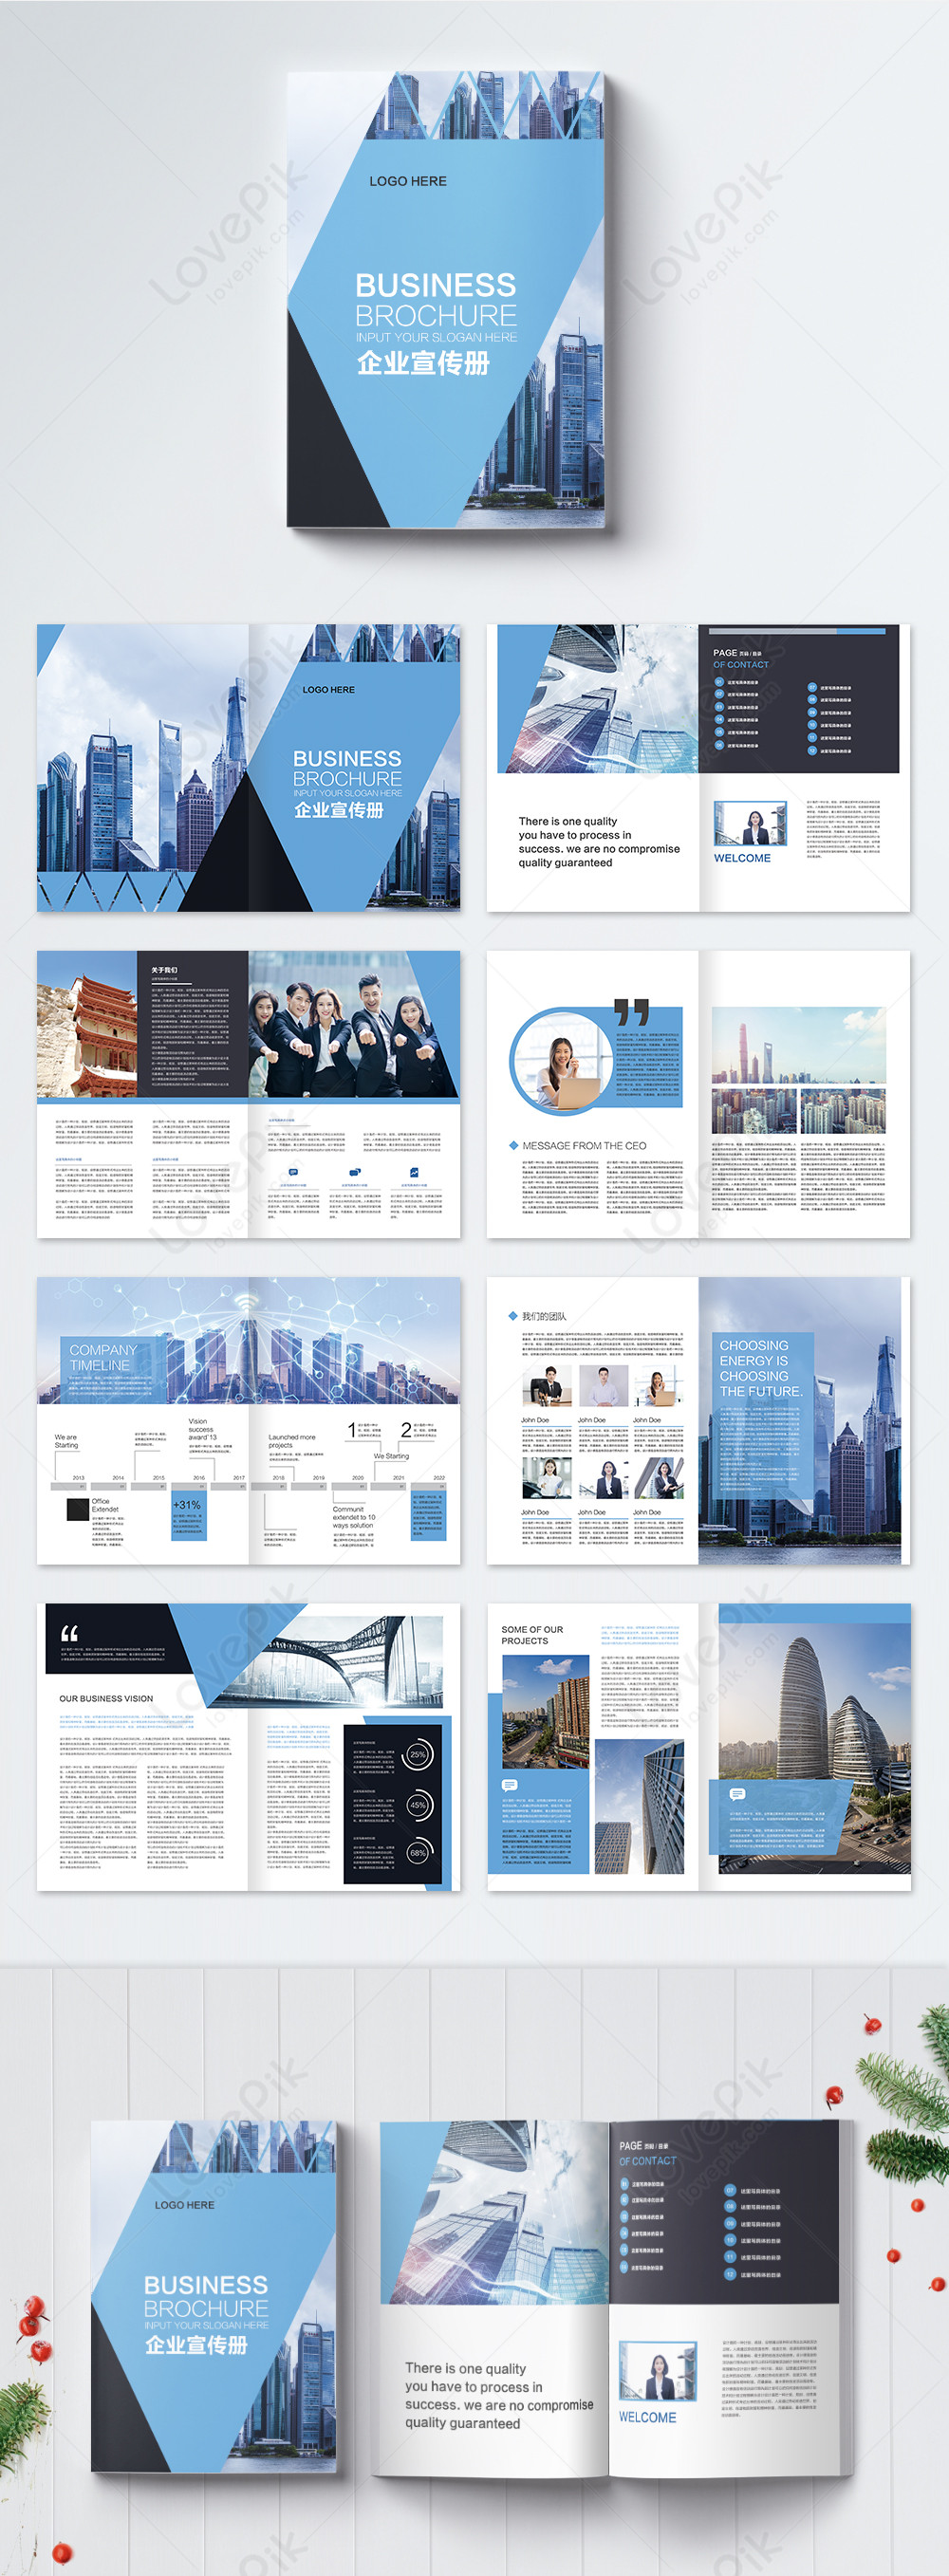 Blue business brochures template image_picture free download 400171521 ...